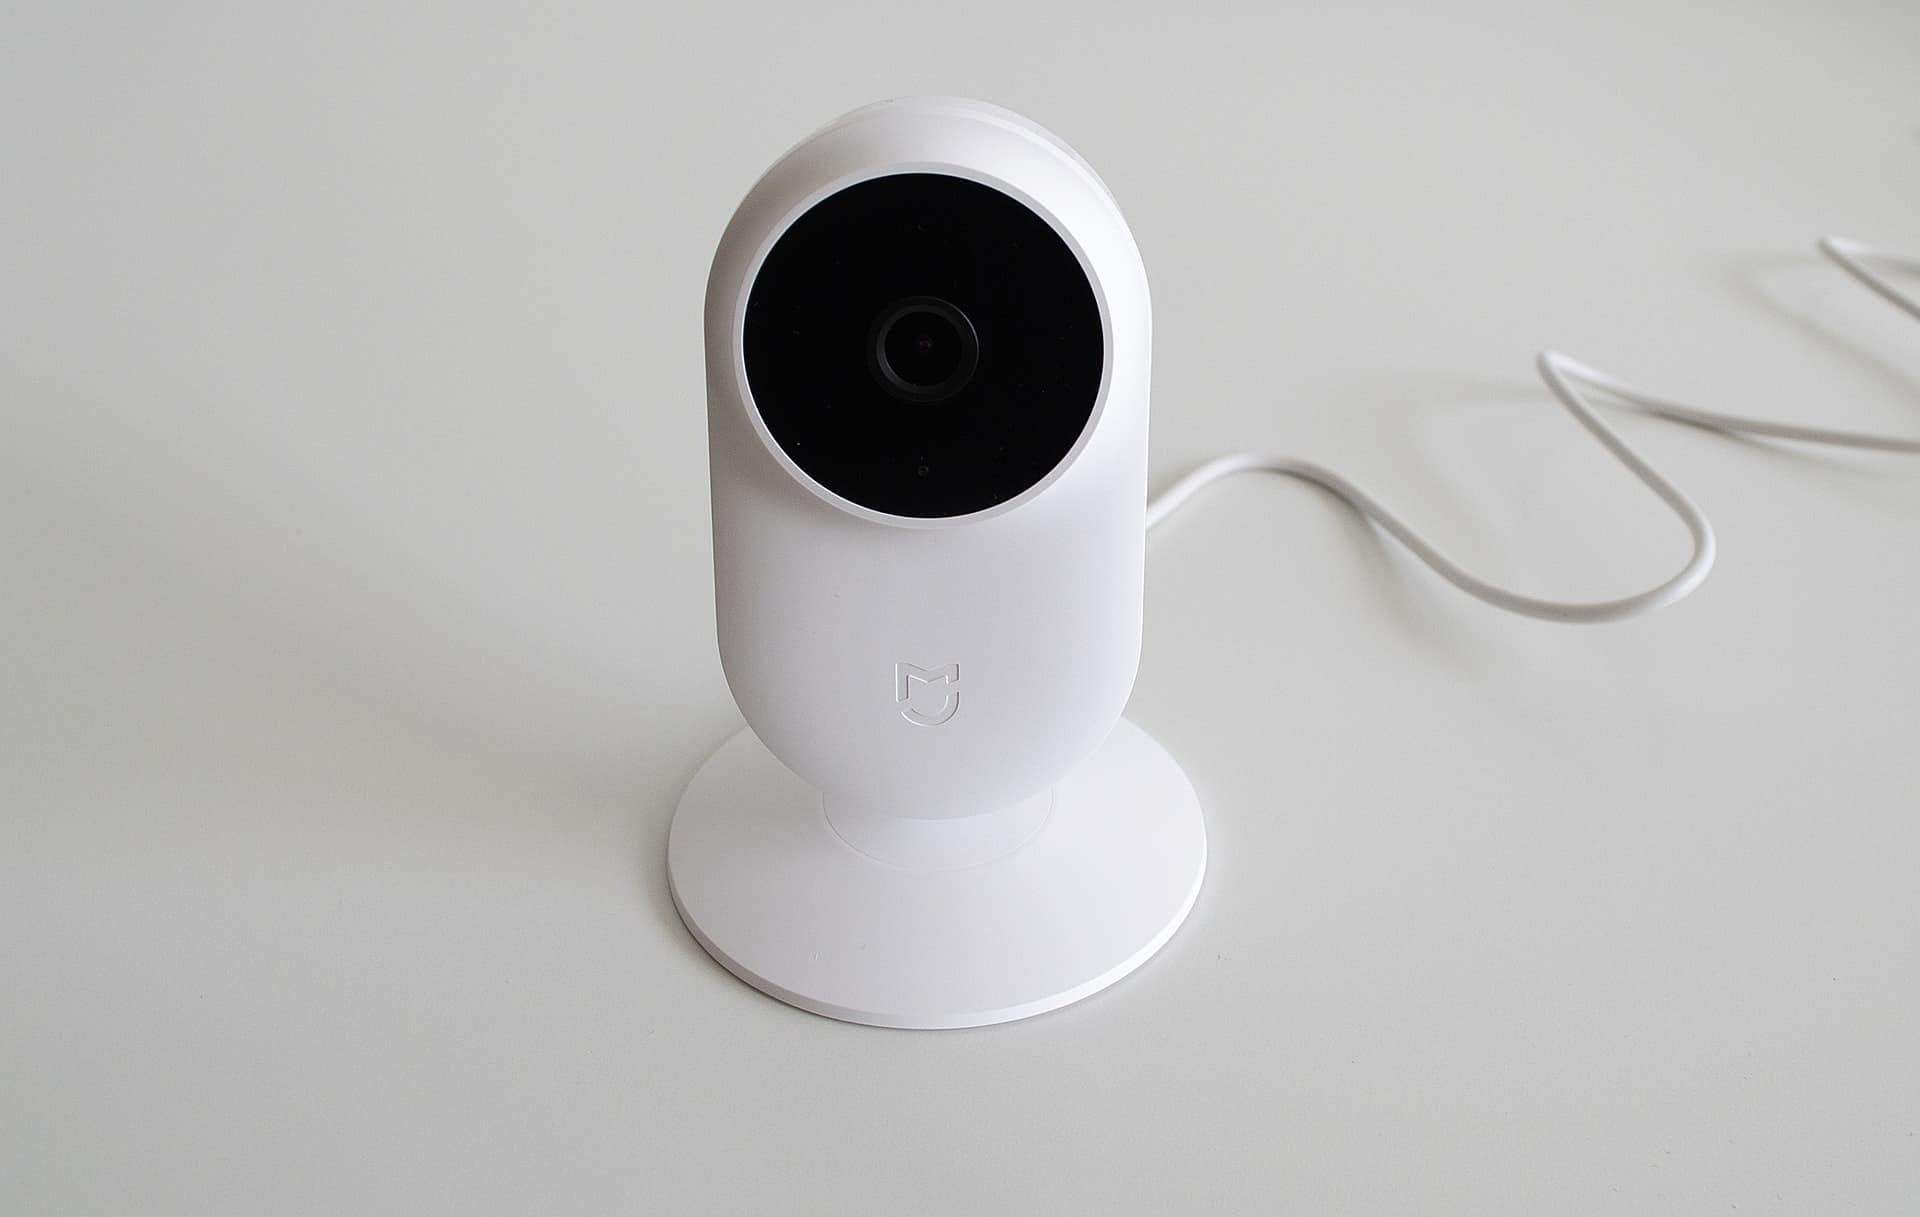 A white, compact security camera sitting on a grey surface.